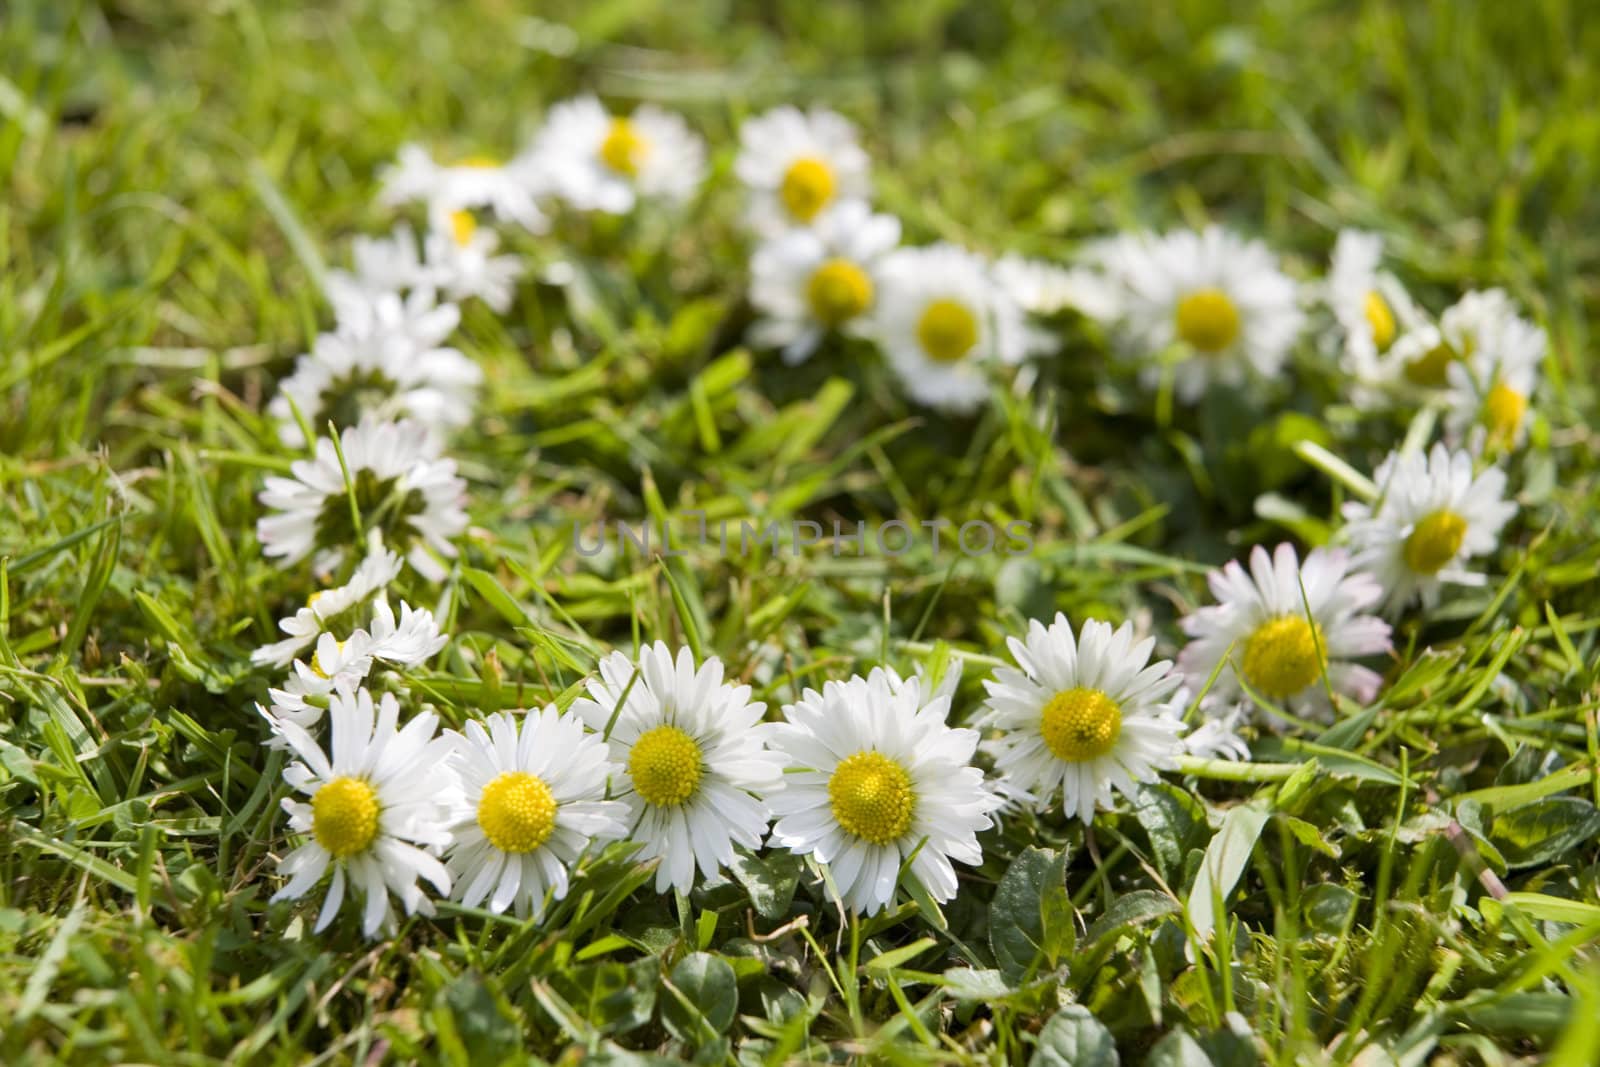 daisy chain in the shape of a heart on the grass